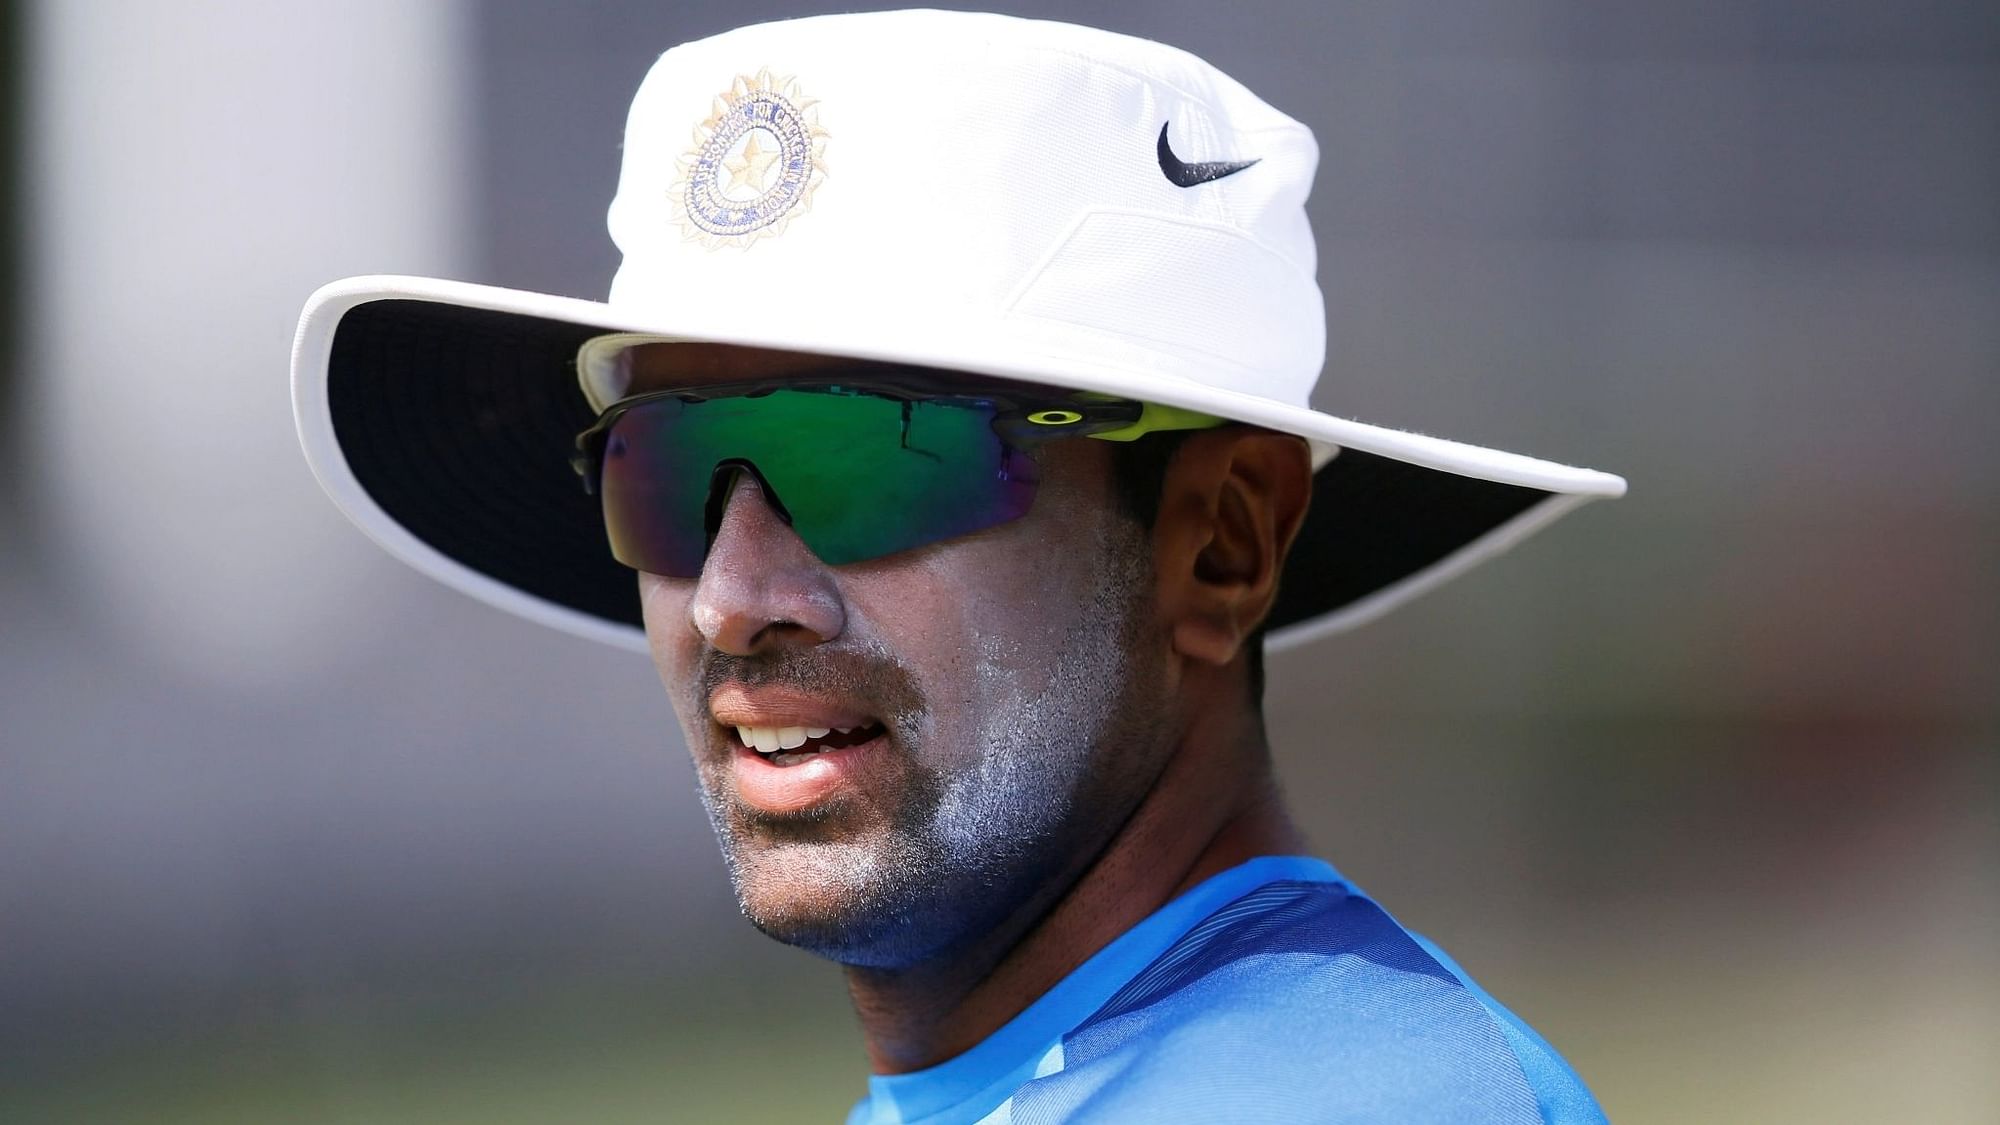 Ravichandran Ashwin says Indians were not allowed to enter the same lift as the Australians despite being in the same bio-bubble.